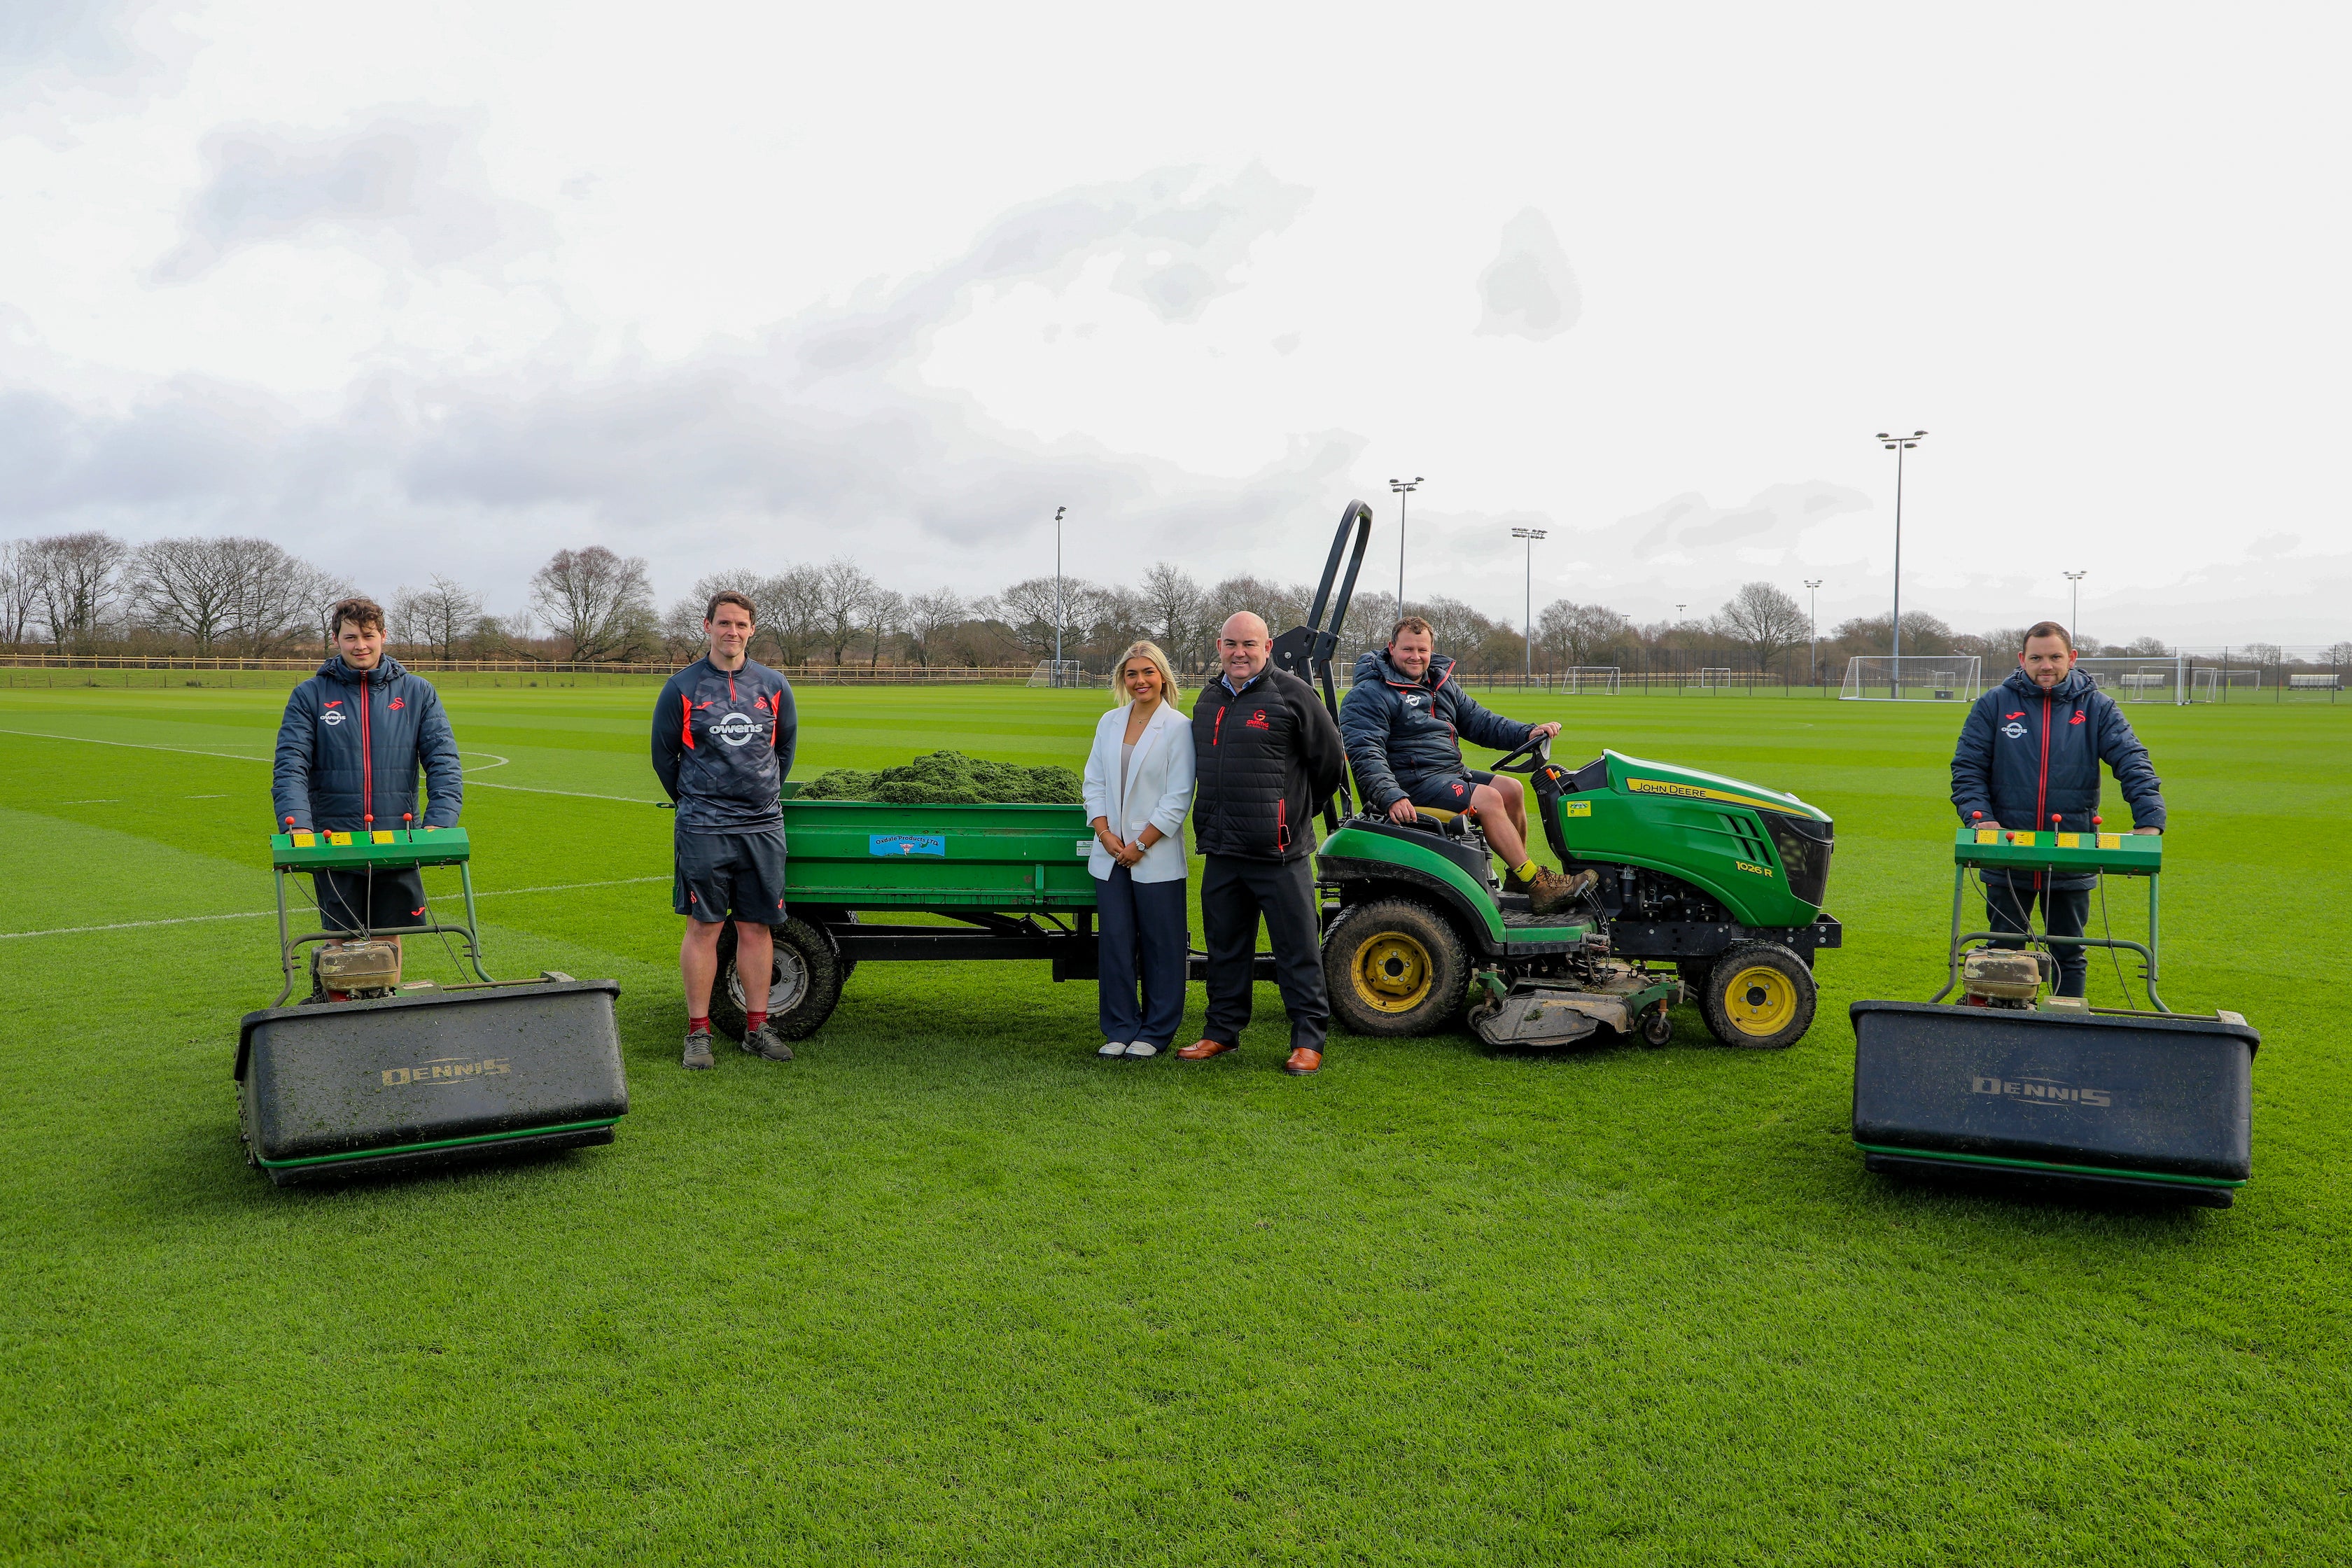 Swansea City AFC teams up with Gavin Griffiths Group on innovative green waste recycling initiative